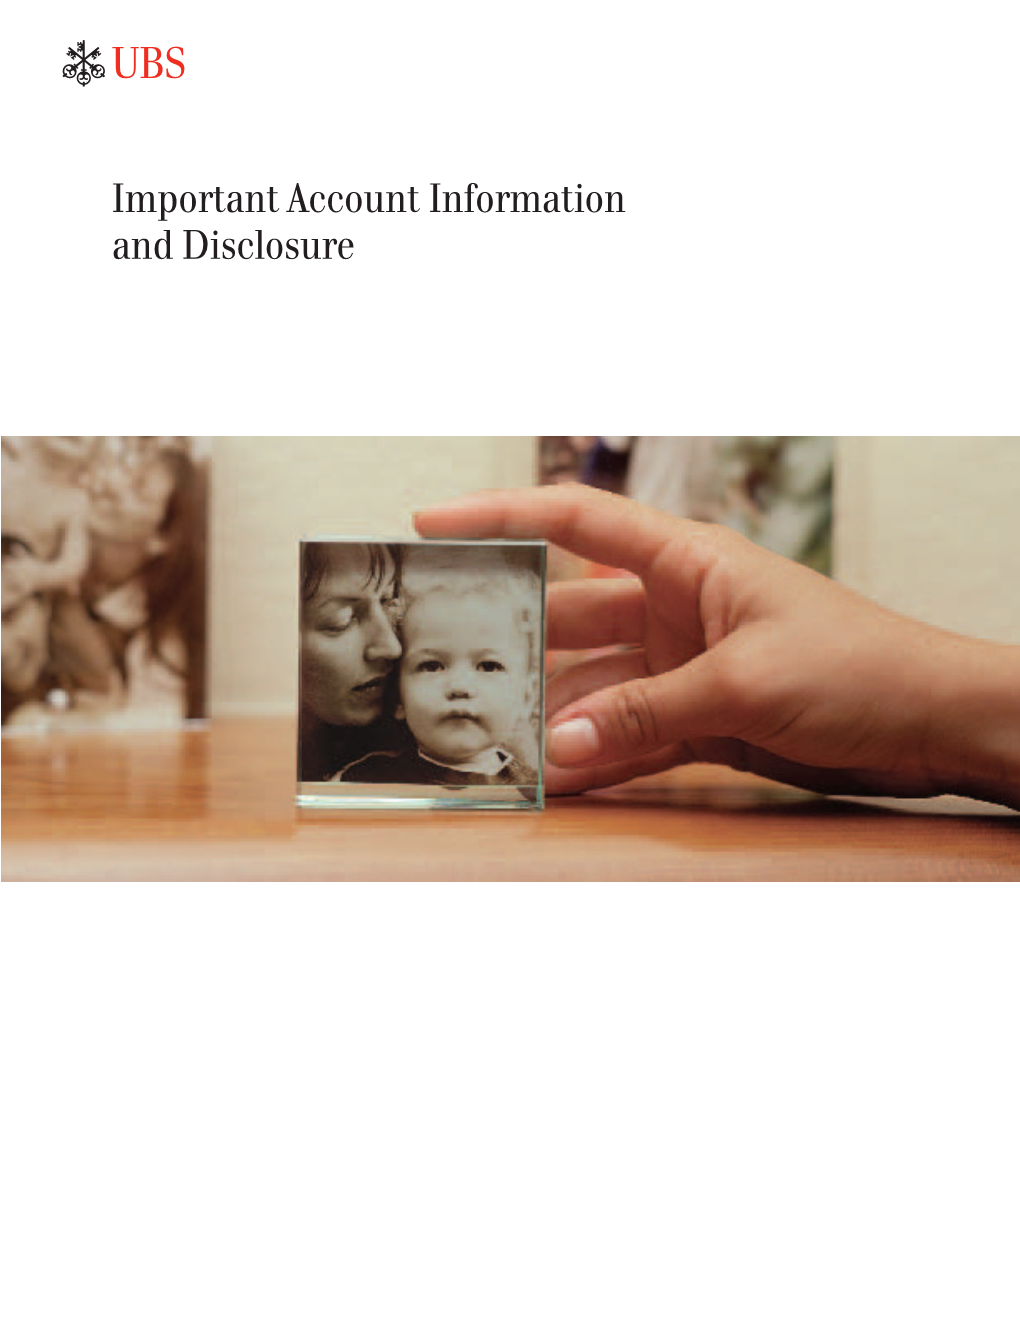 Important Account Information and Disclosure